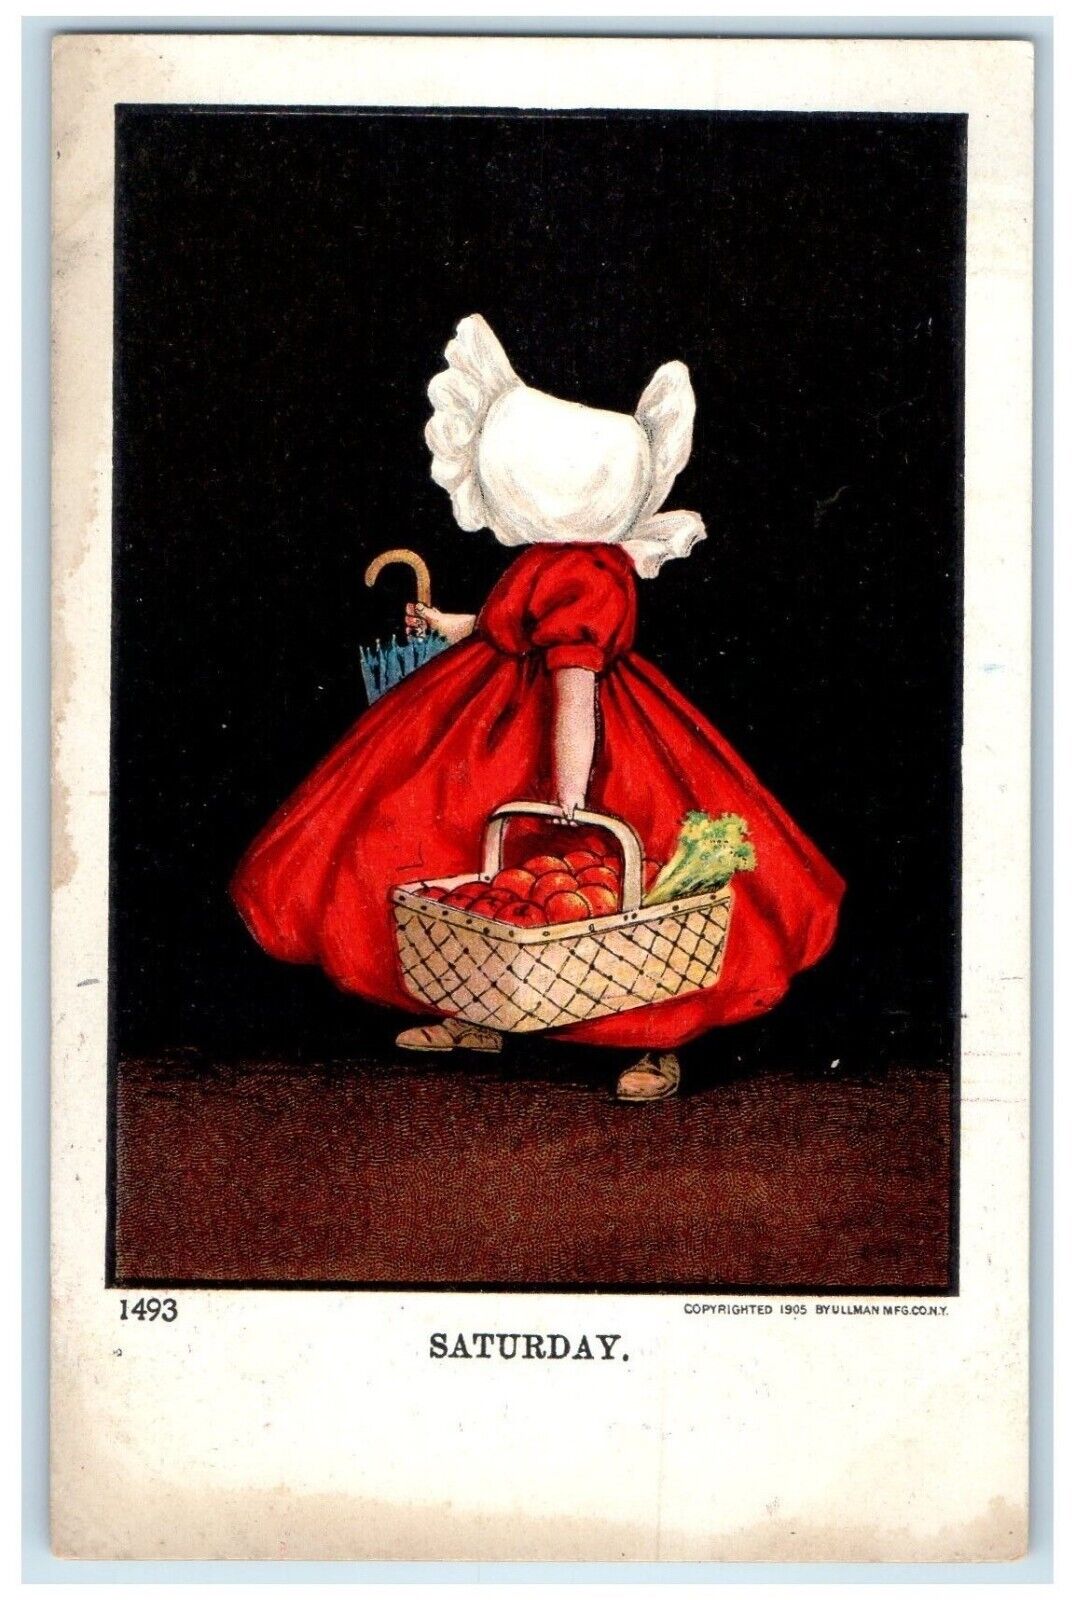 c1905 Girl Holding Basket With Apple Saturday Wall Unposted Antique Postcard